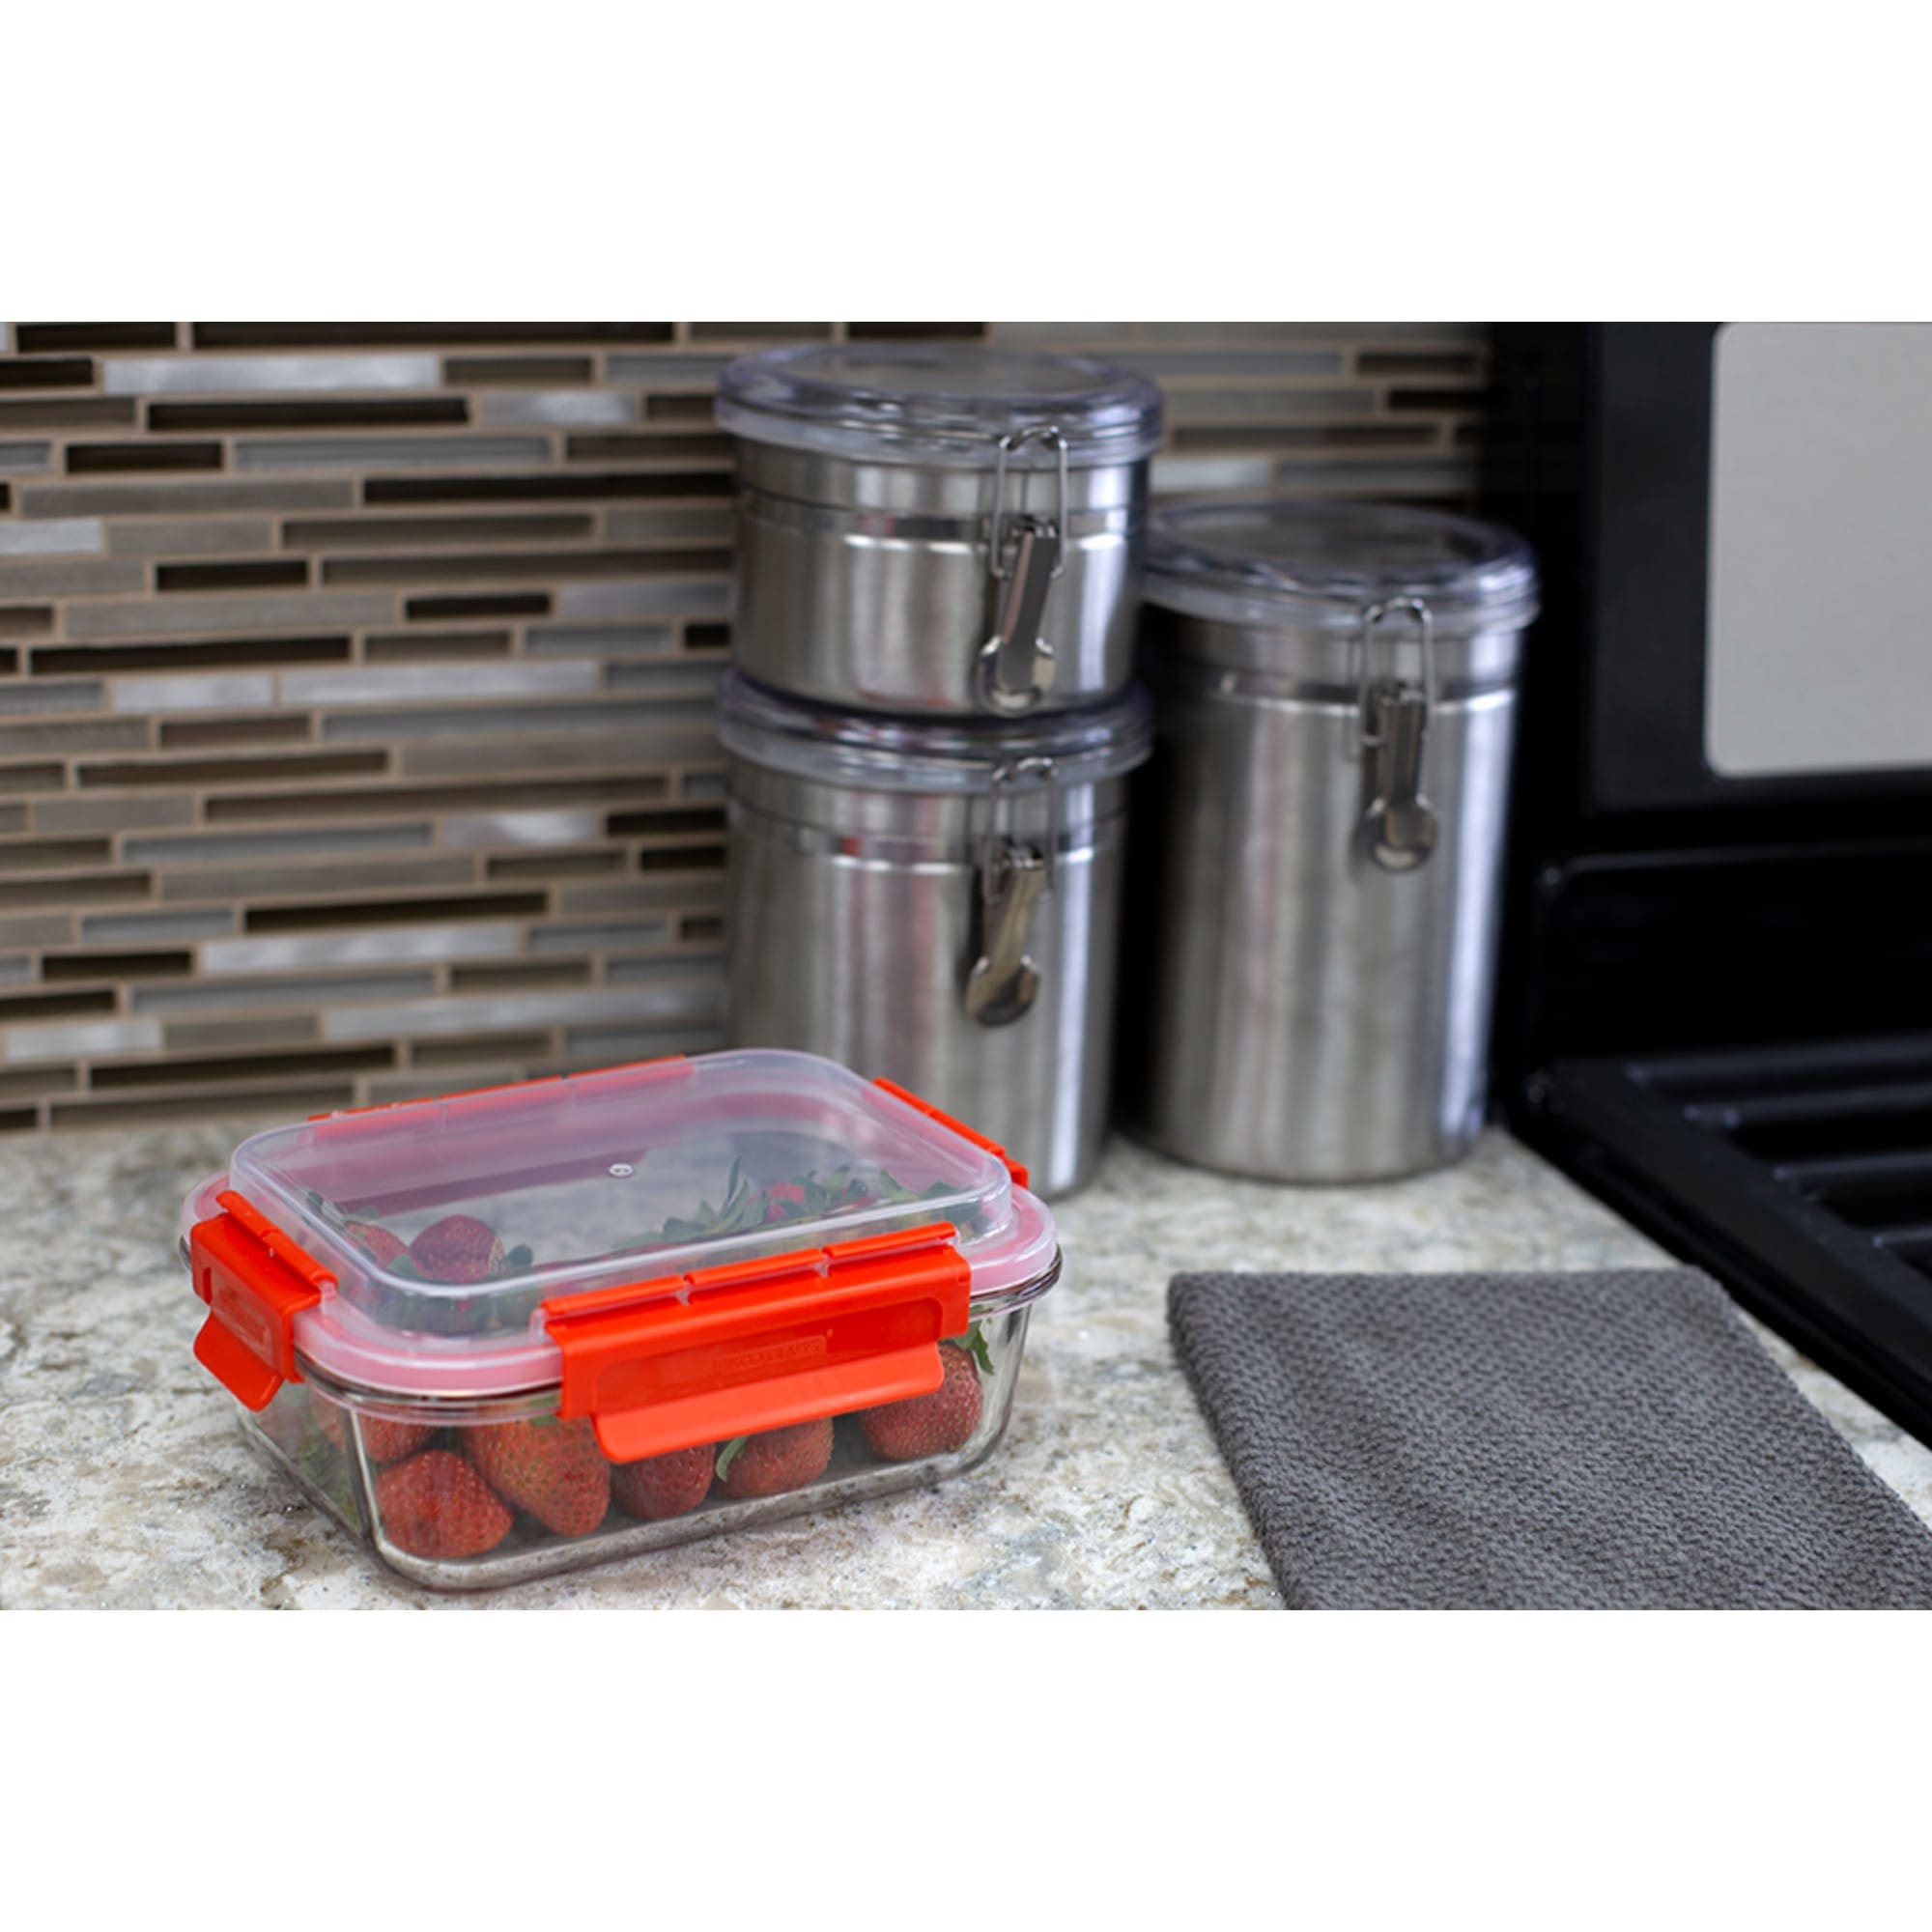 Home Basics Leak Proof  35oz. Rectangle Glass Food Storage Container with Air-tight Plastic Lid, Red $6.00 EACH, CASE PACK OF 12